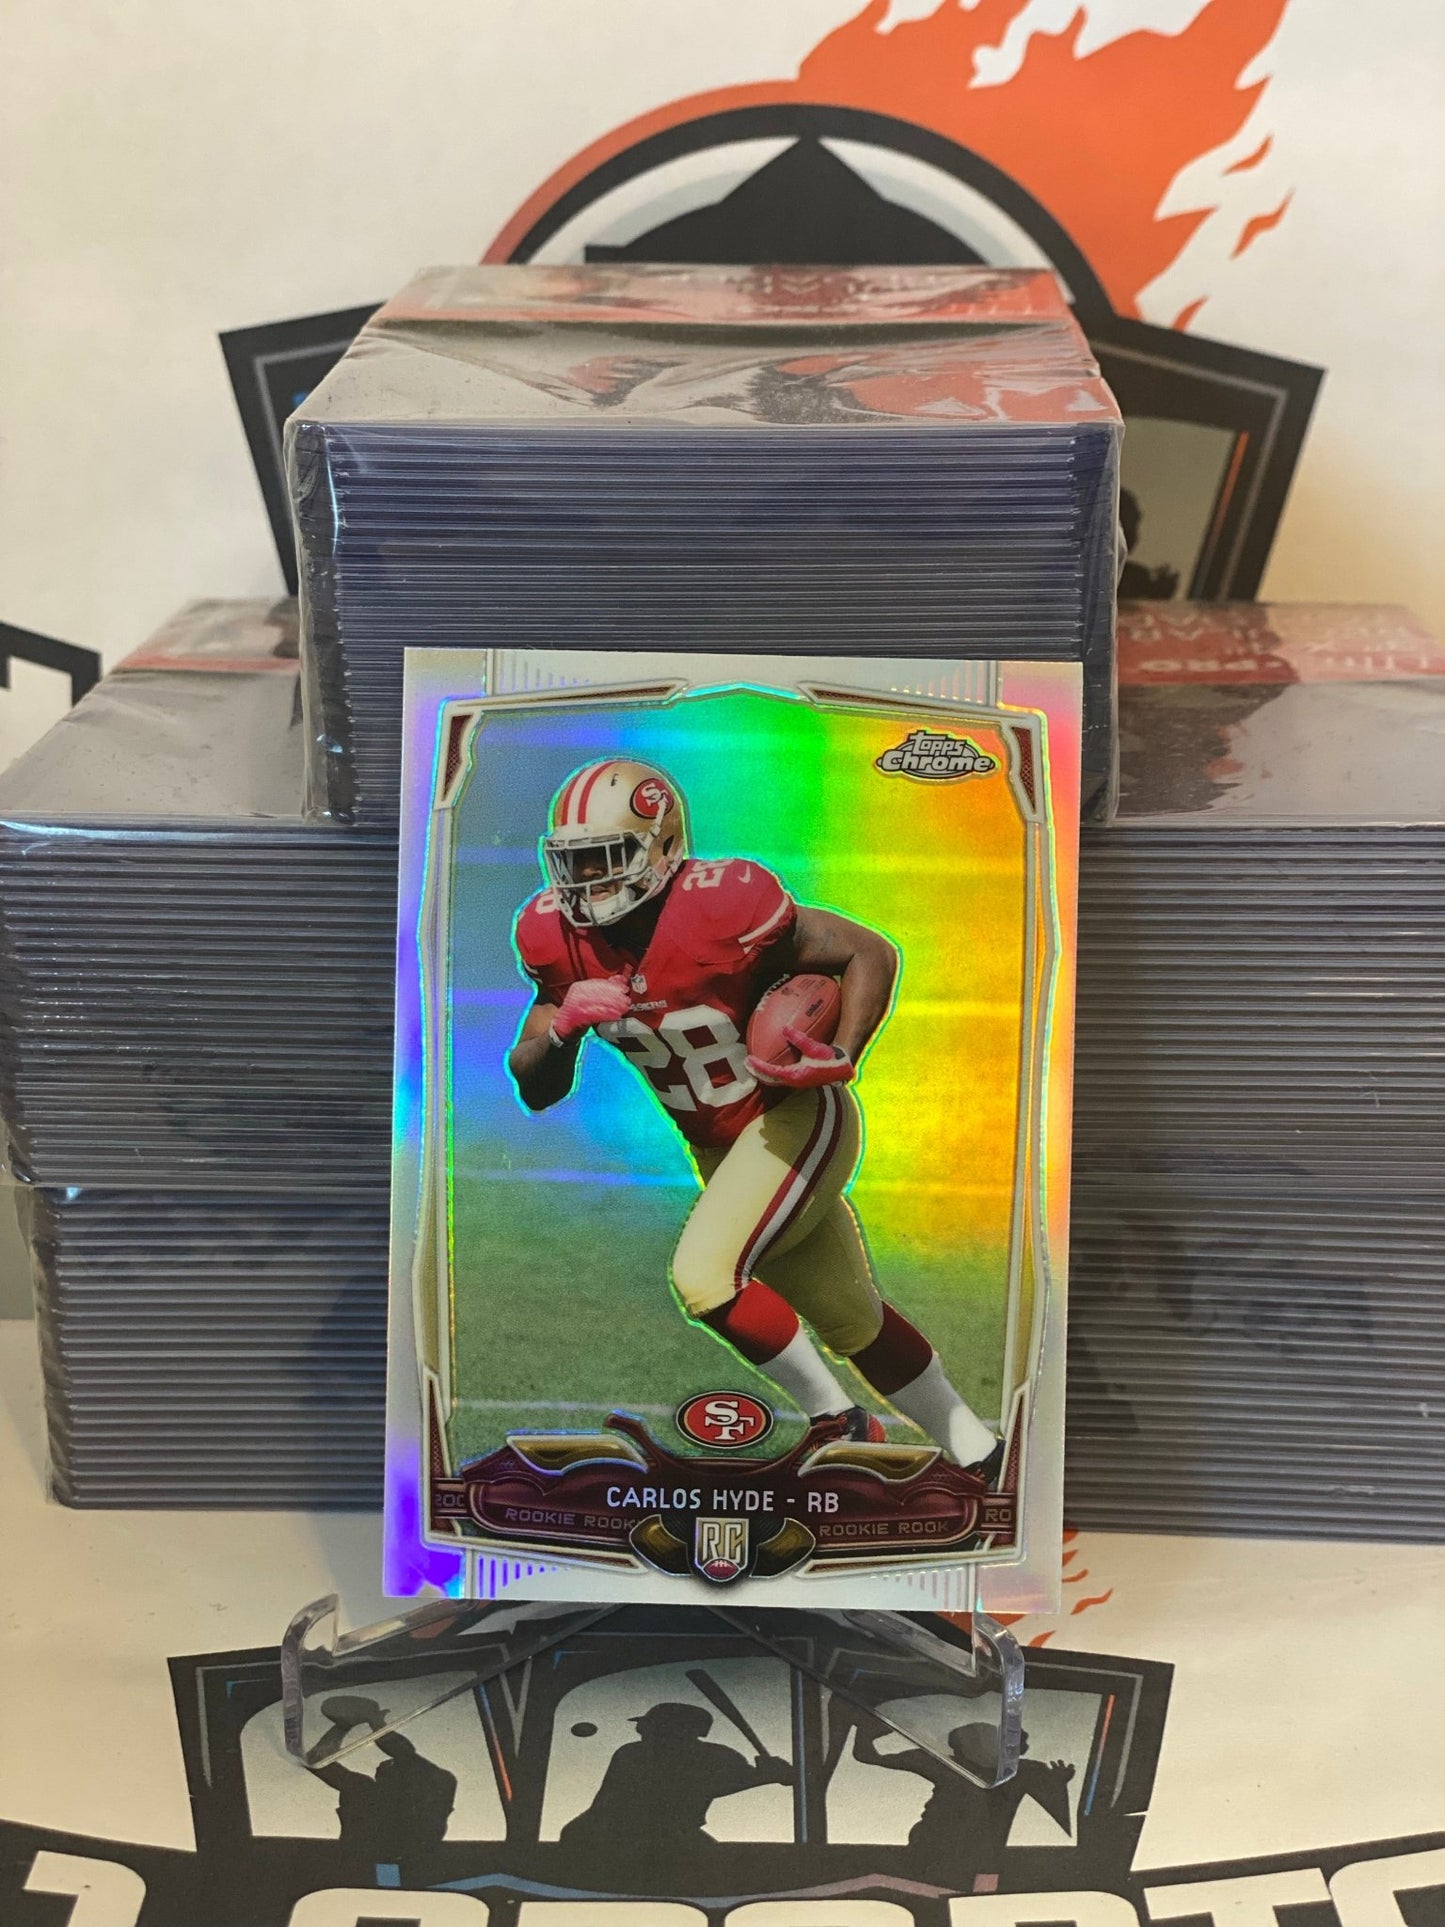 2014 Topps Chrome (Refractor) Carlos Hyde Rookie #158